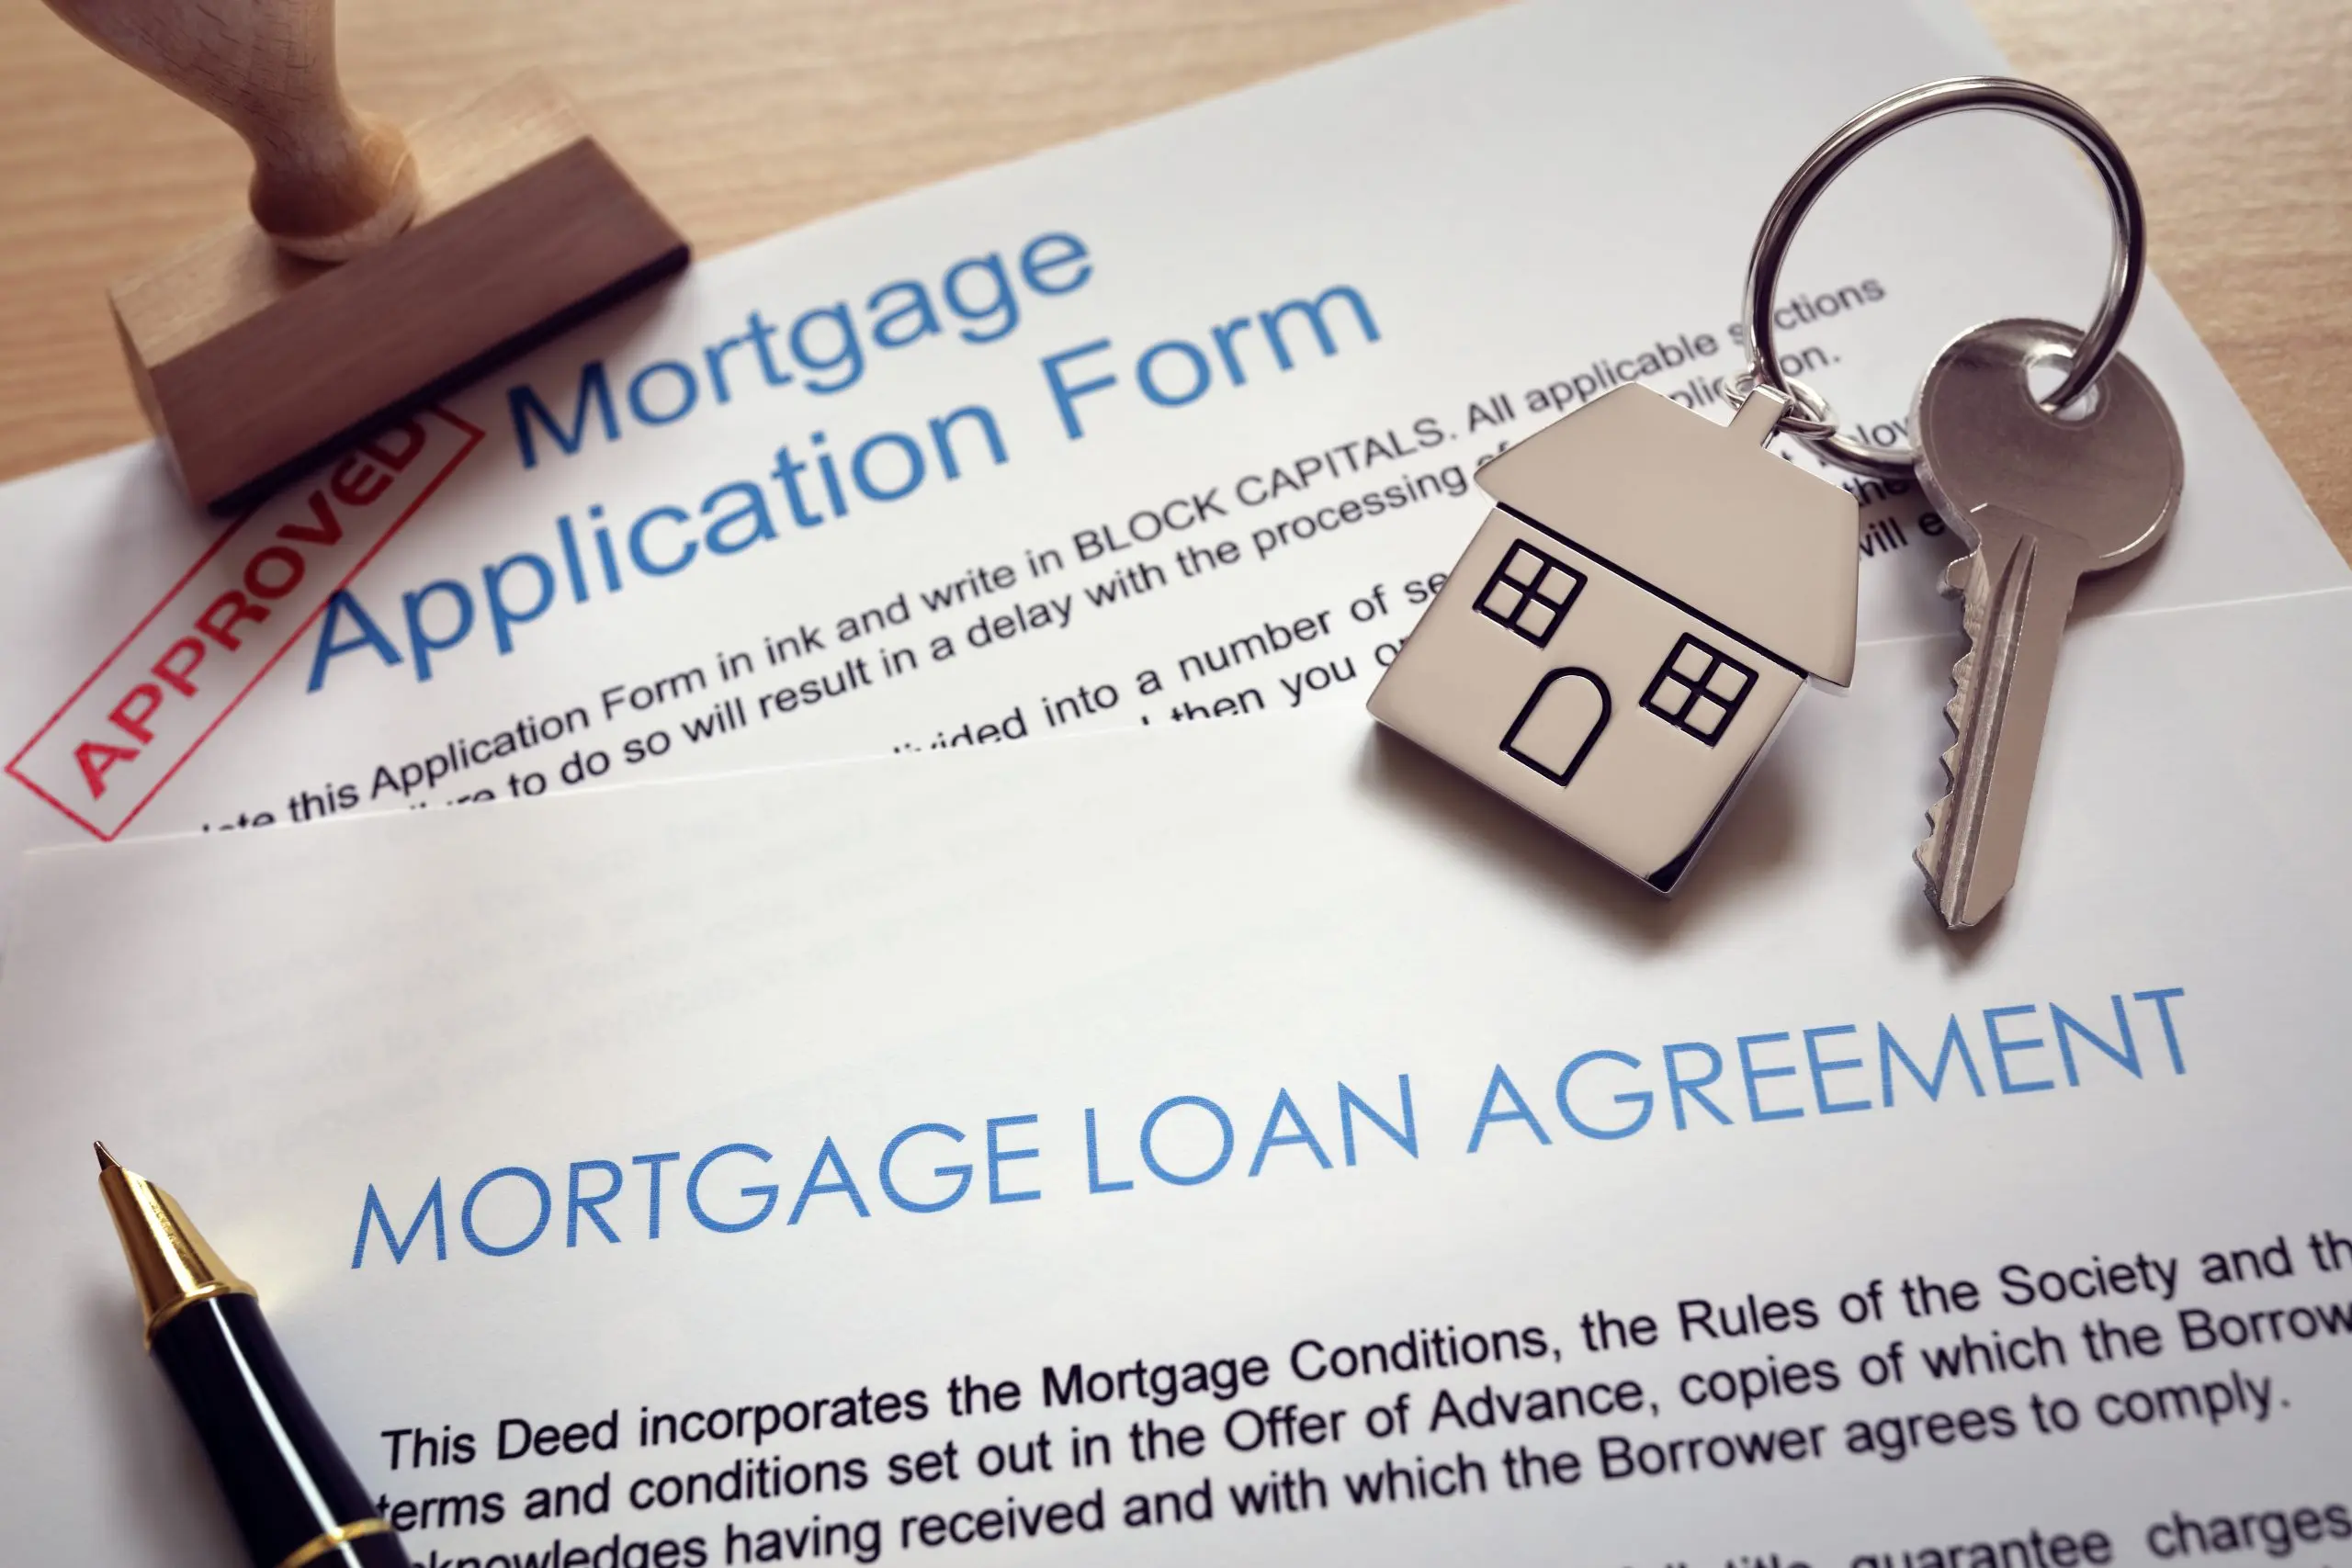 https://www.newwestern.com/wp-content/uploads/2023/05/mortgage-application-loan-agreement-and-house-key-2022-02-02-05-05-24-utc-scaled.jpg